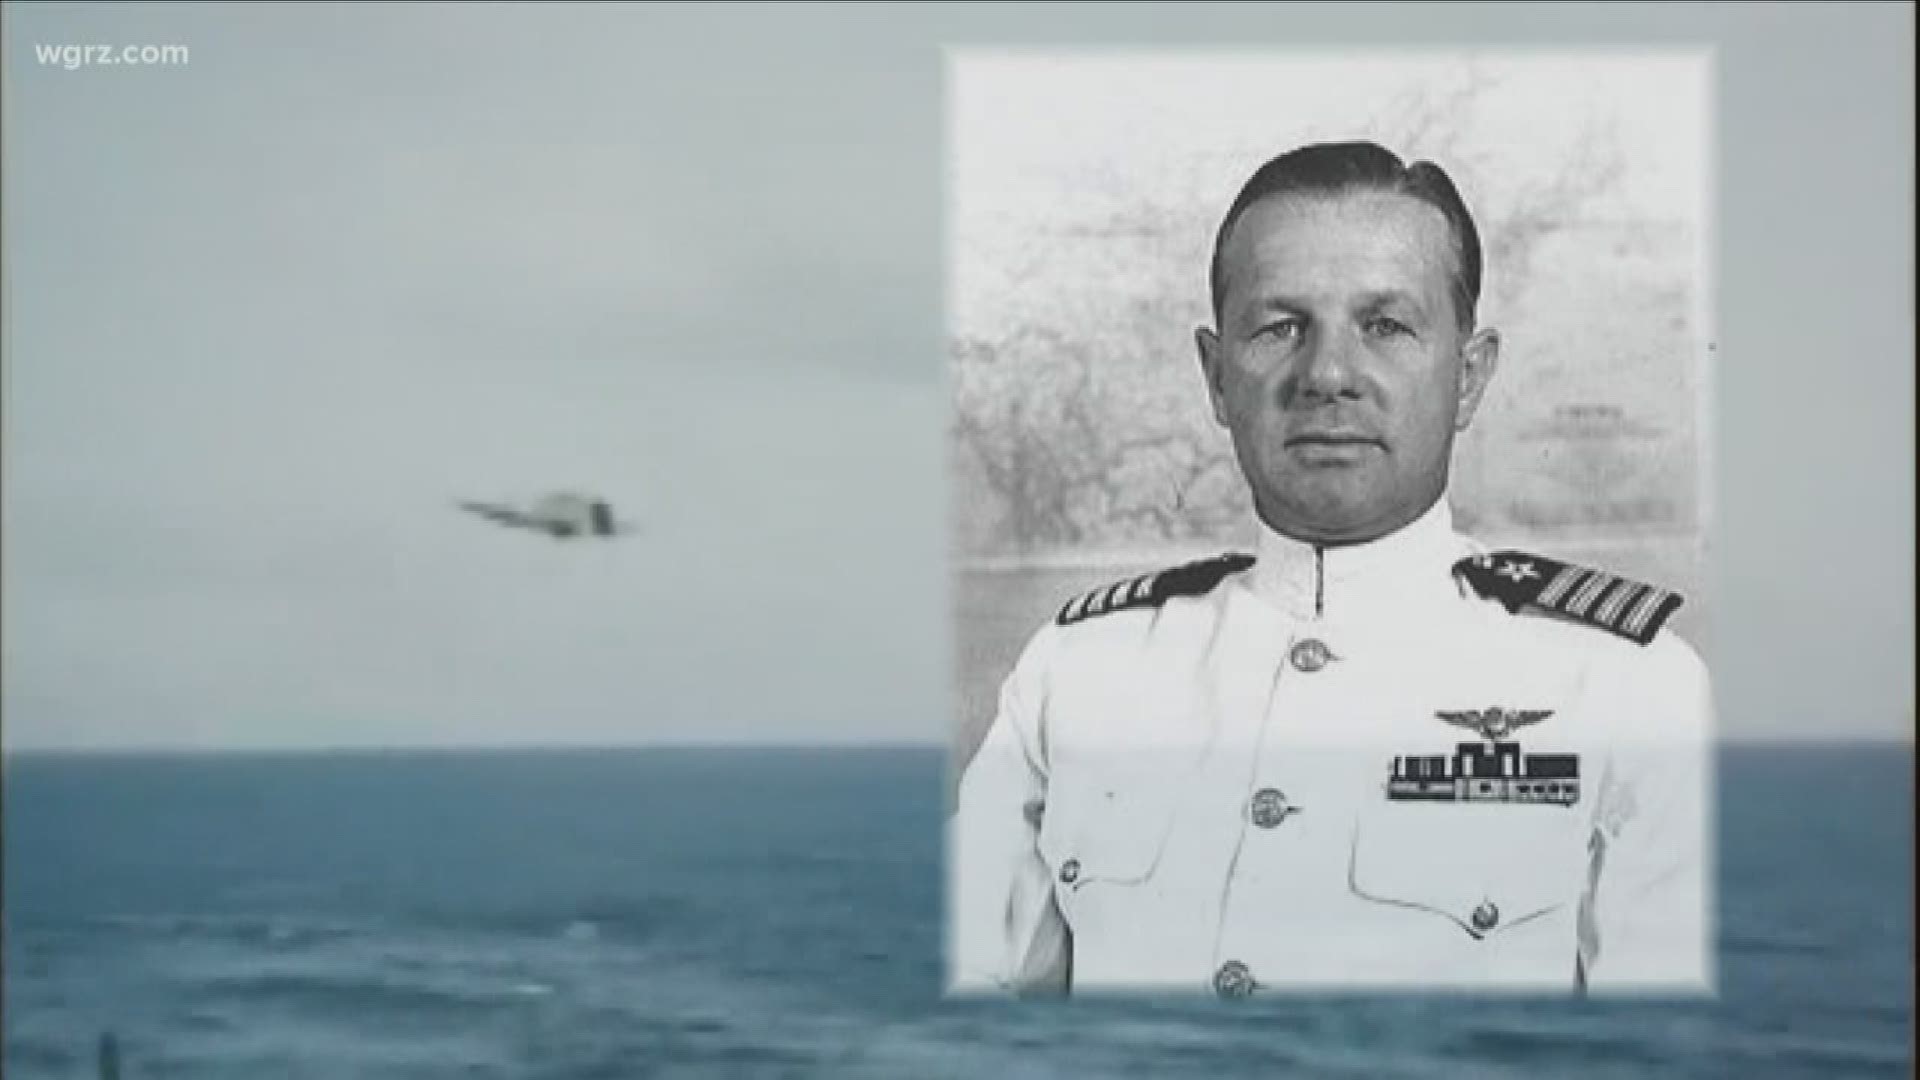 New movie reminds us of WNY service and sacrifice